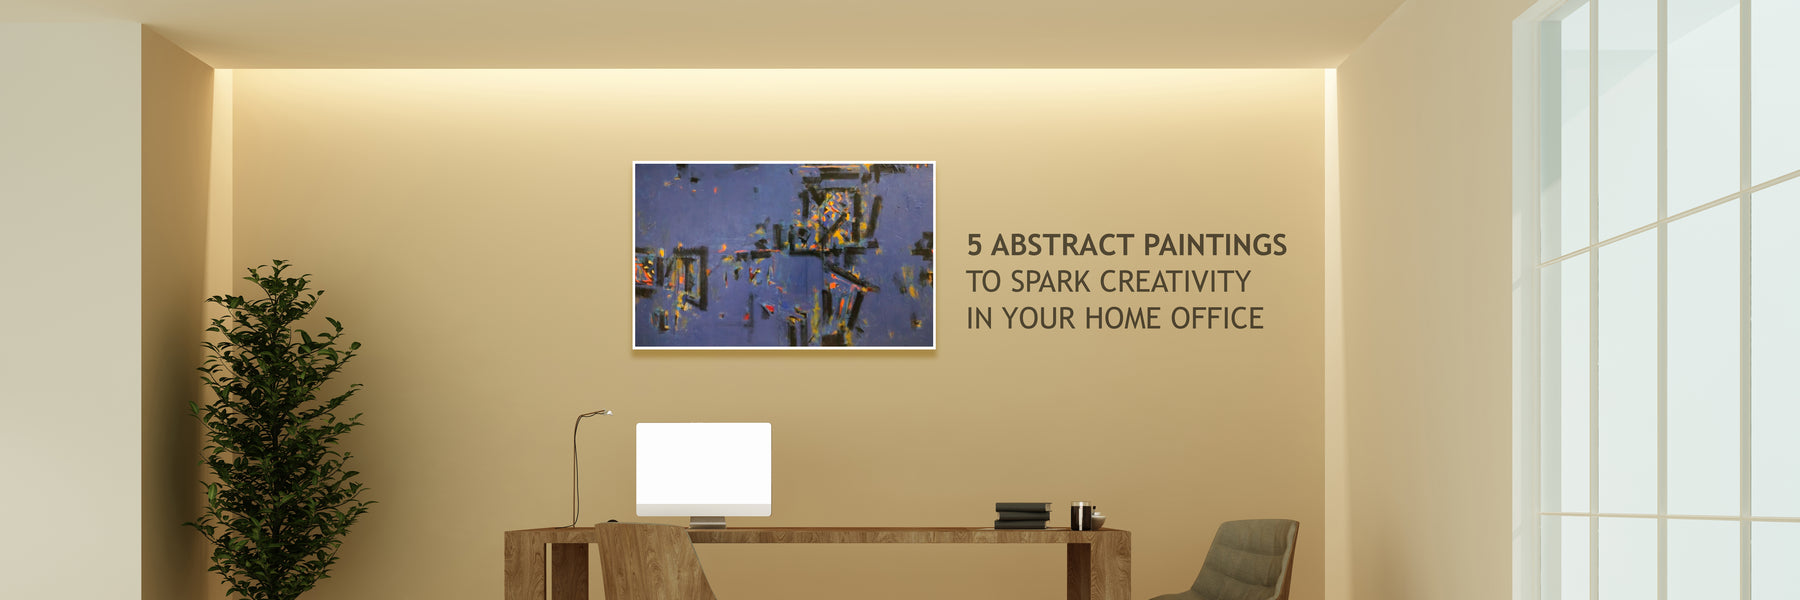 5 Abstract Paintings to Spark Creativity in Your Home Office